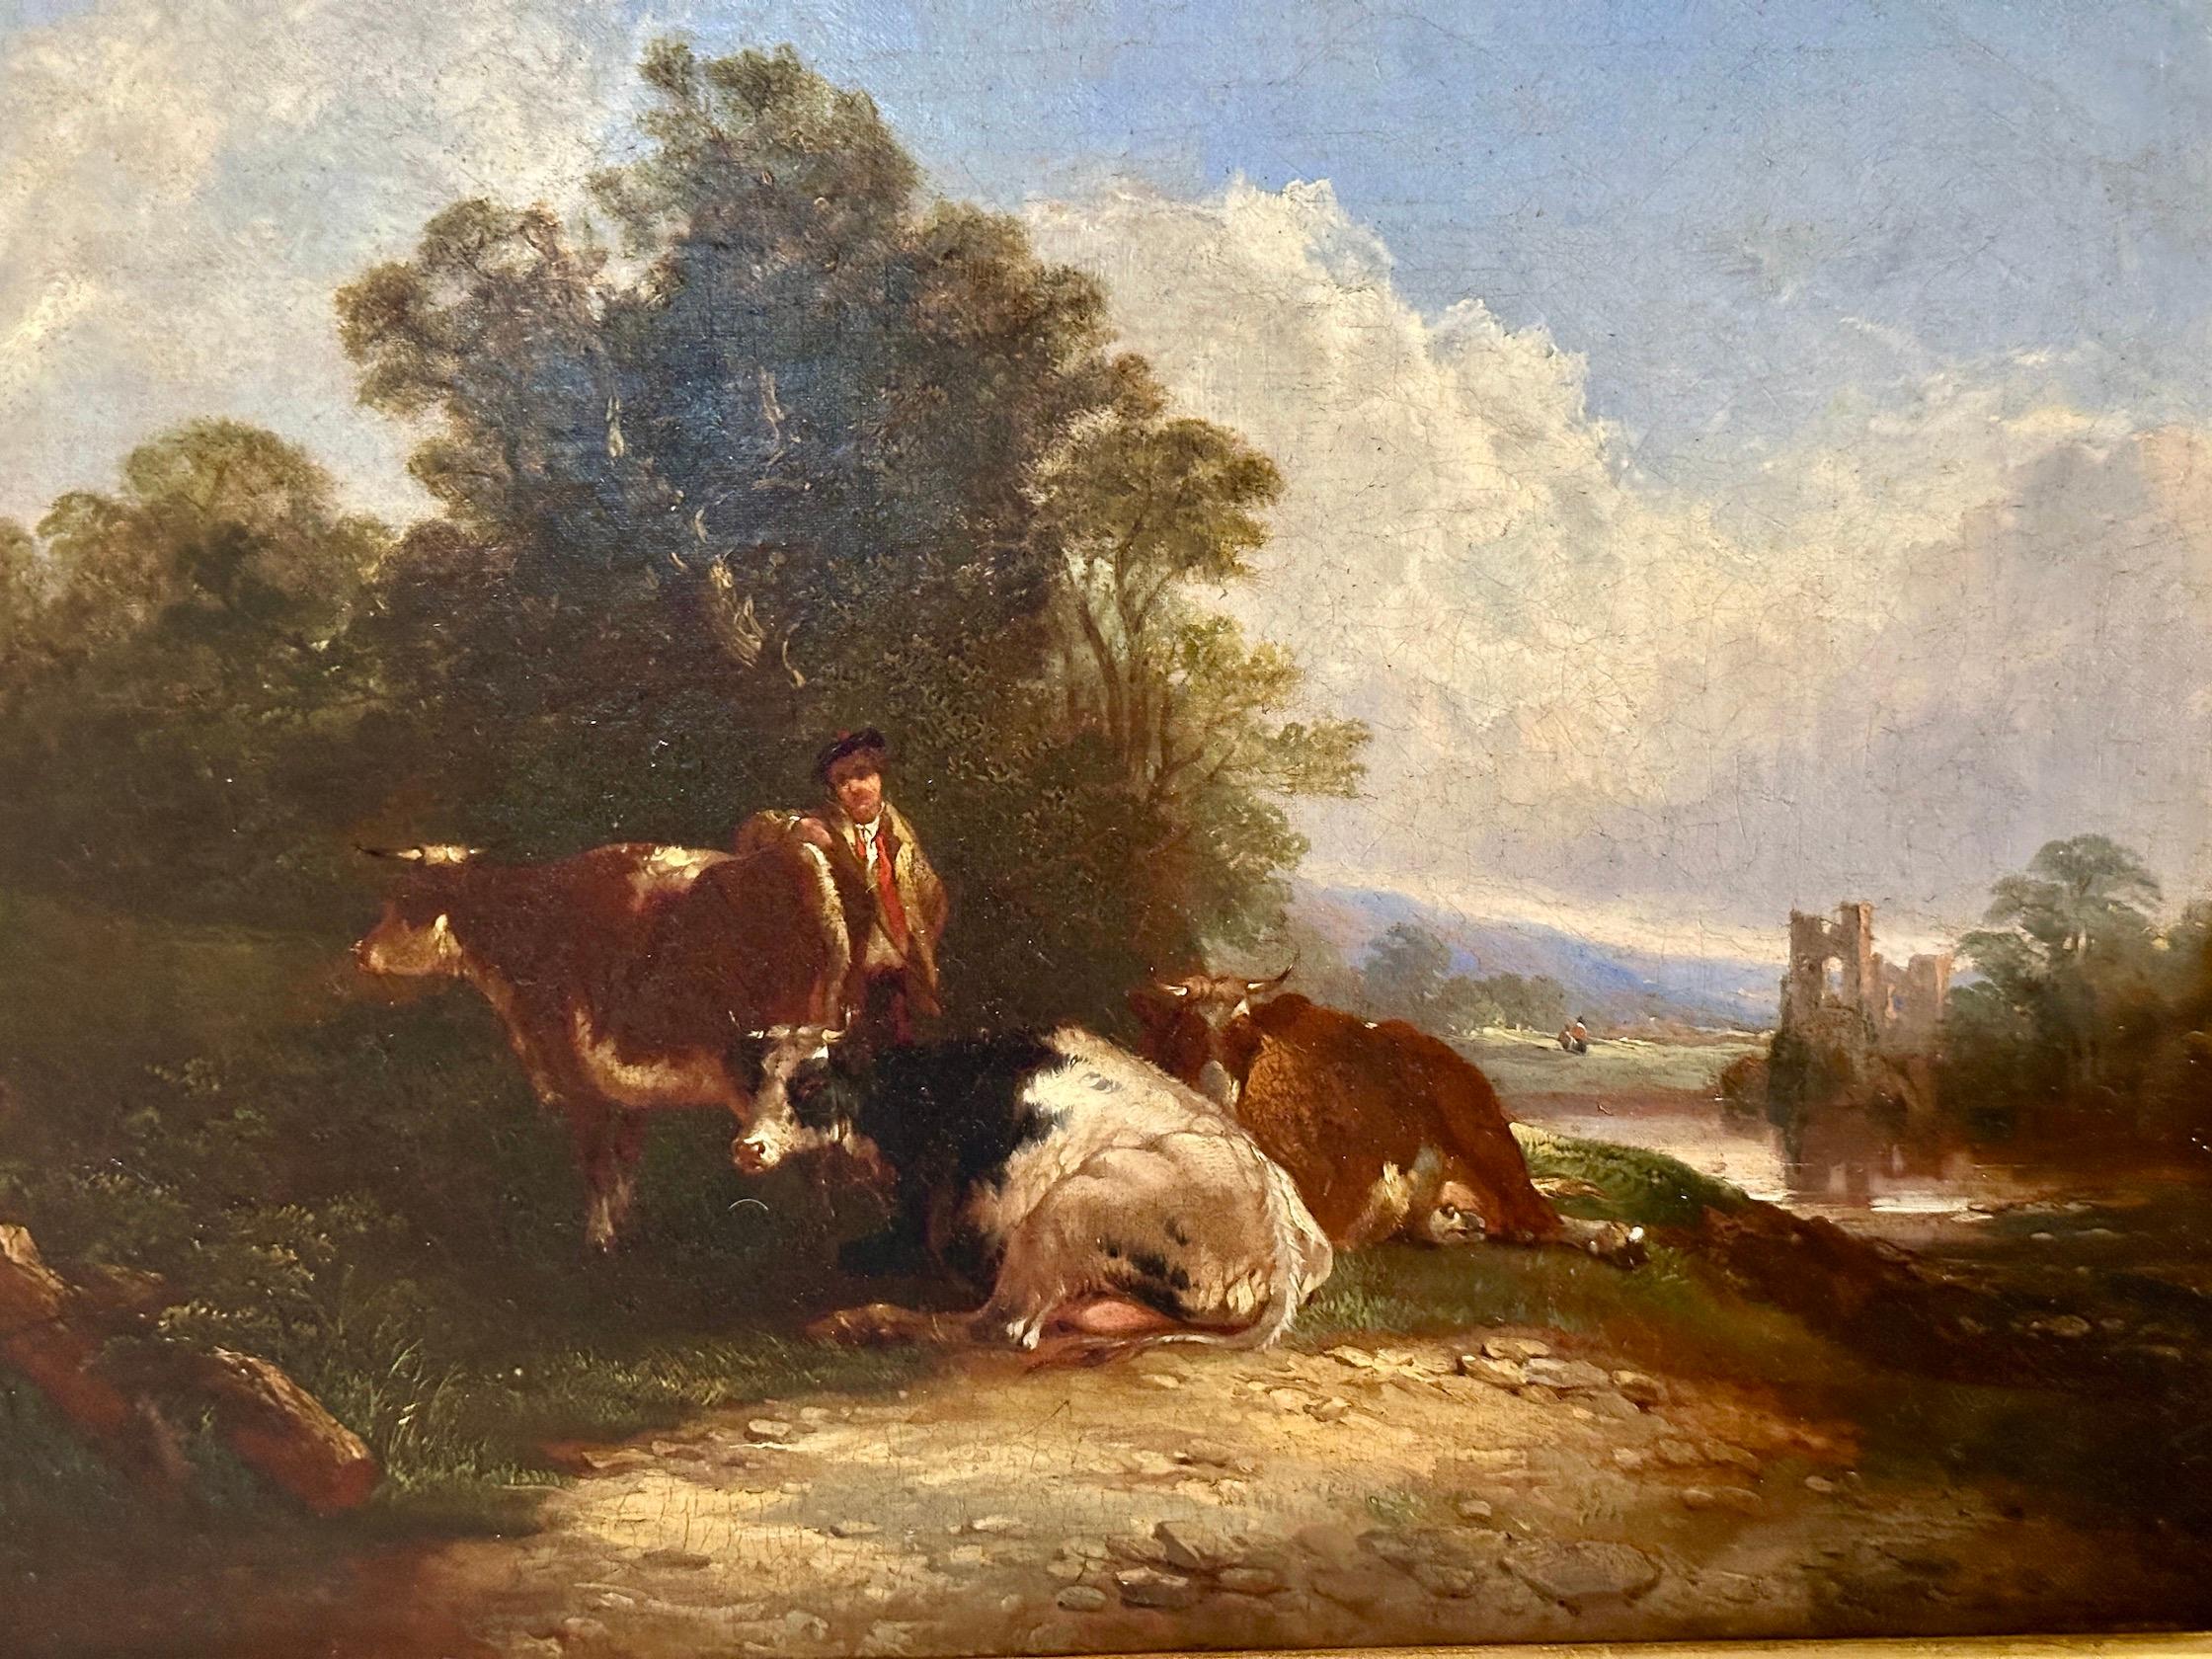 English 19th century Antique landscape with horses and farmer by a Cottage - Victorian Painting by William Shayer Senior